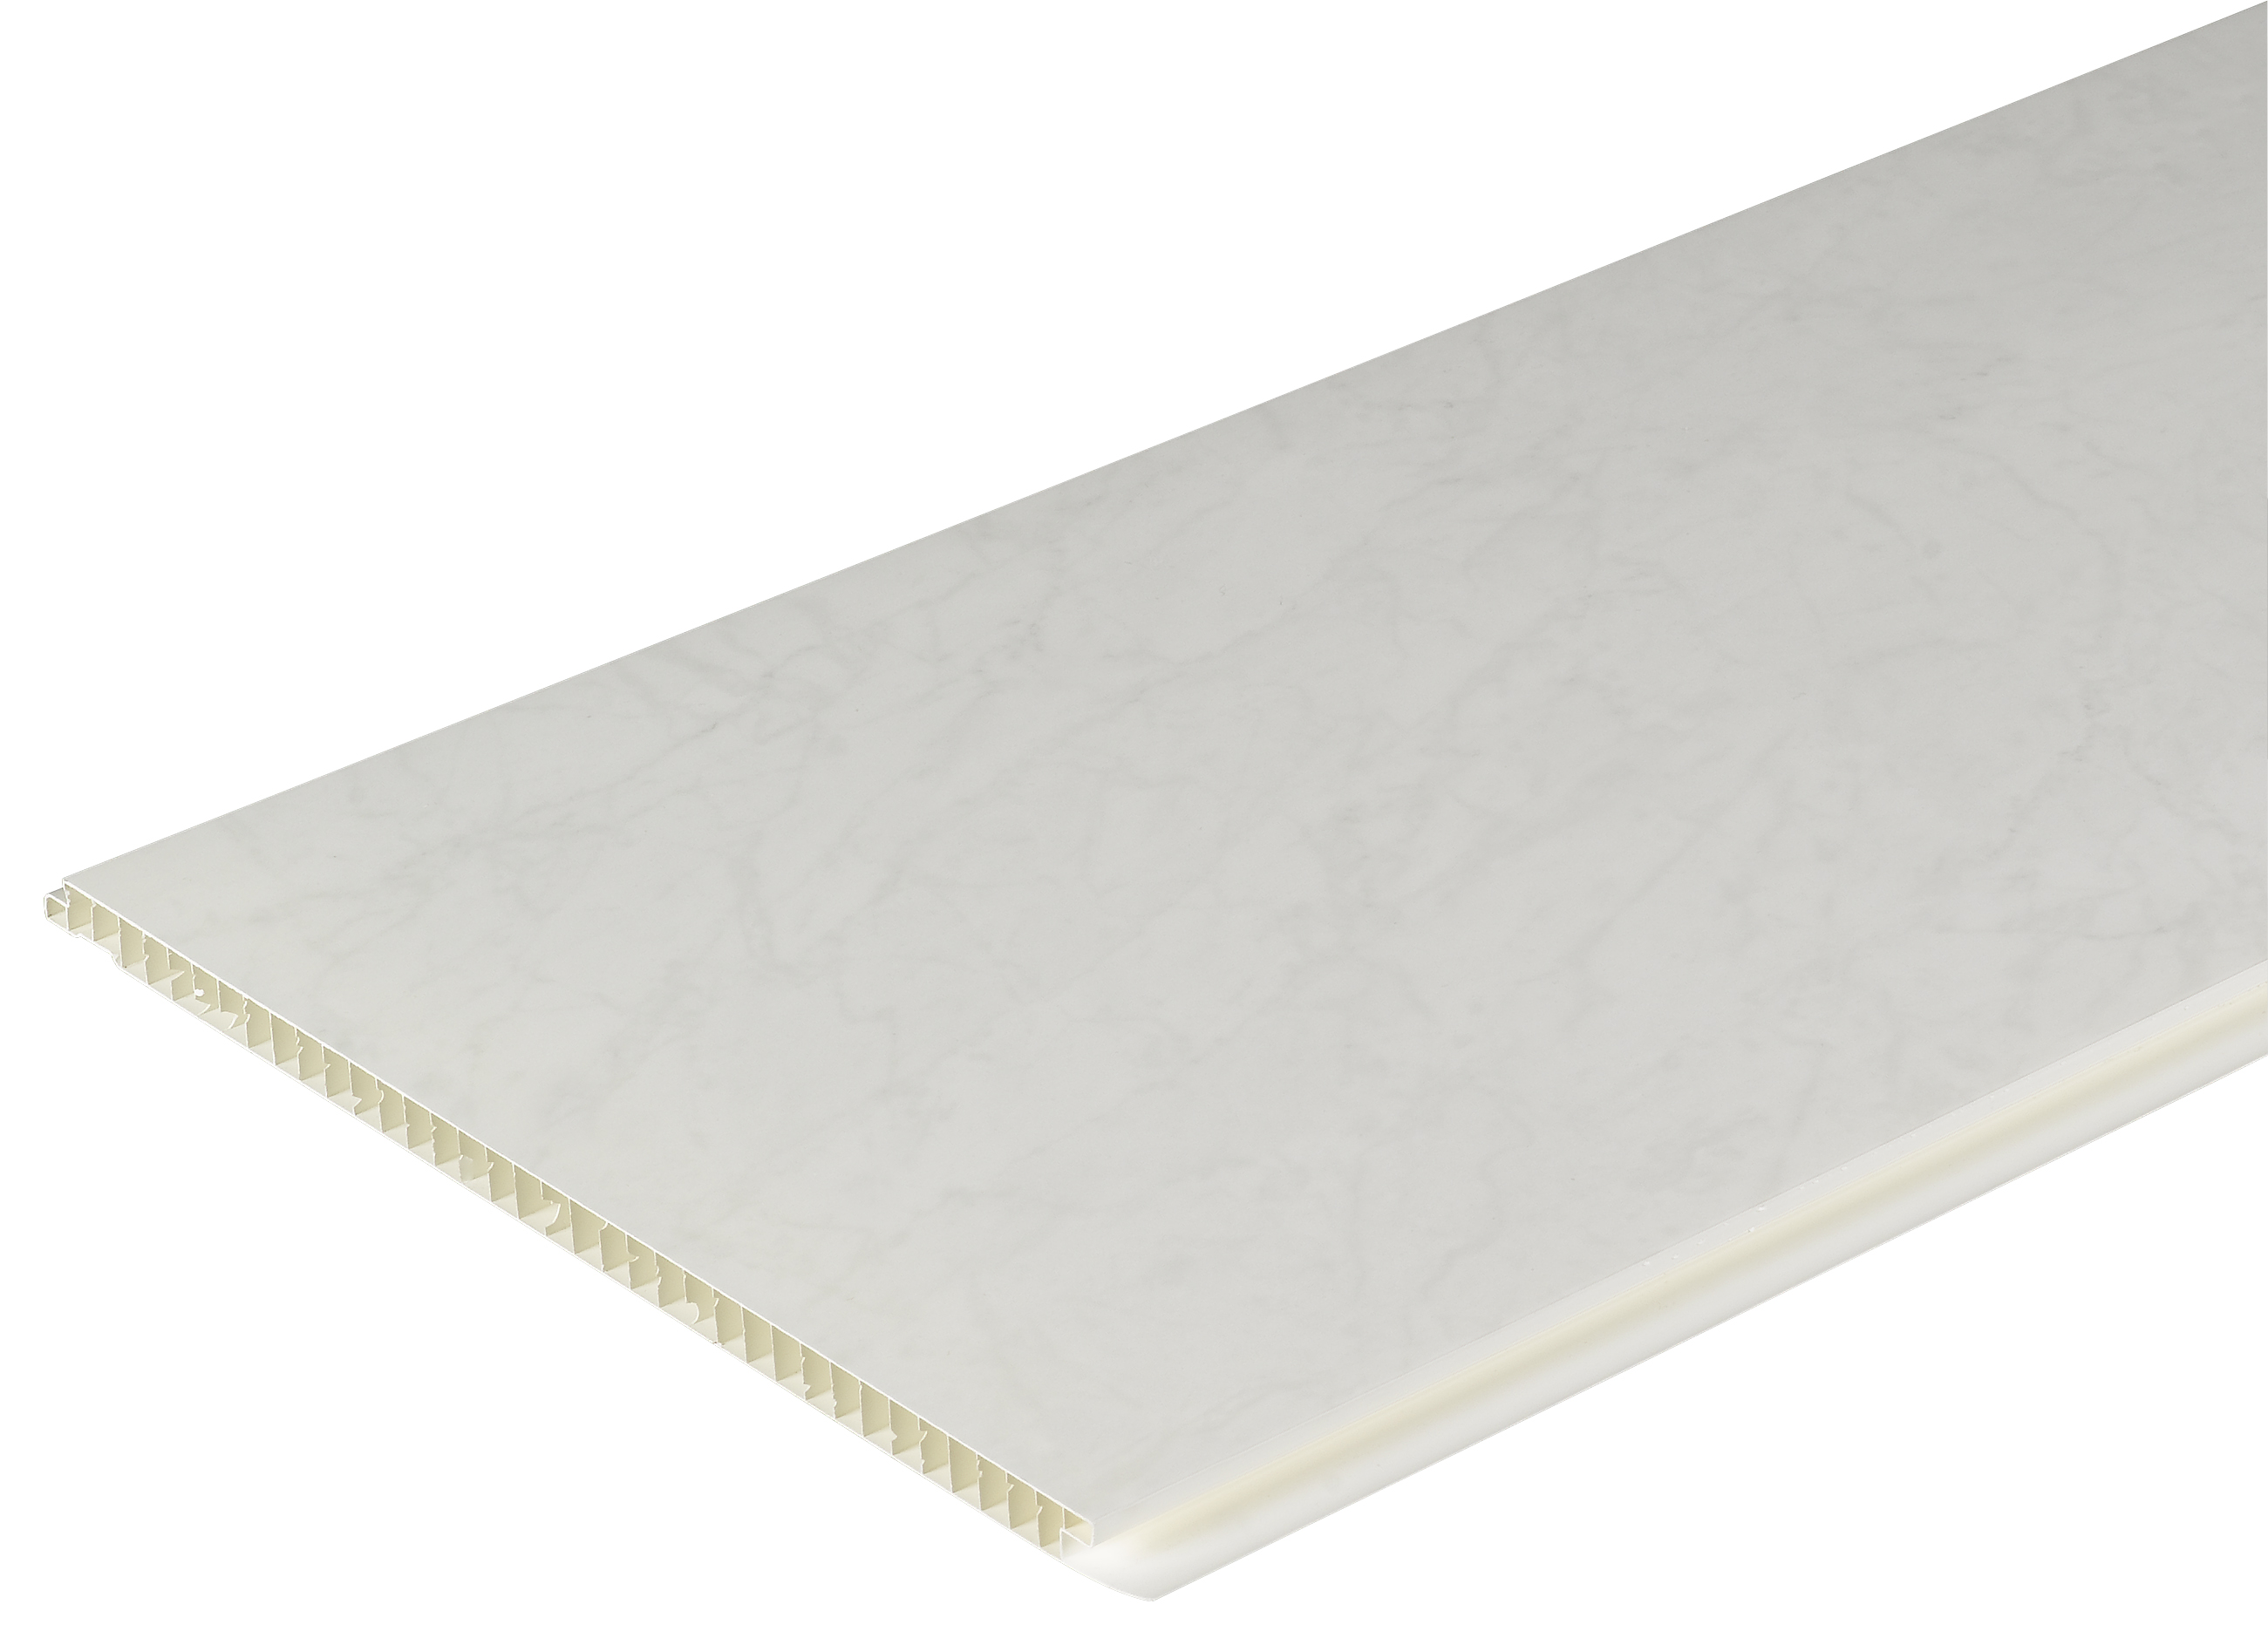 Image of Wickes PVCu Marble Effect Interior Cladding - 250mm x 2.5m